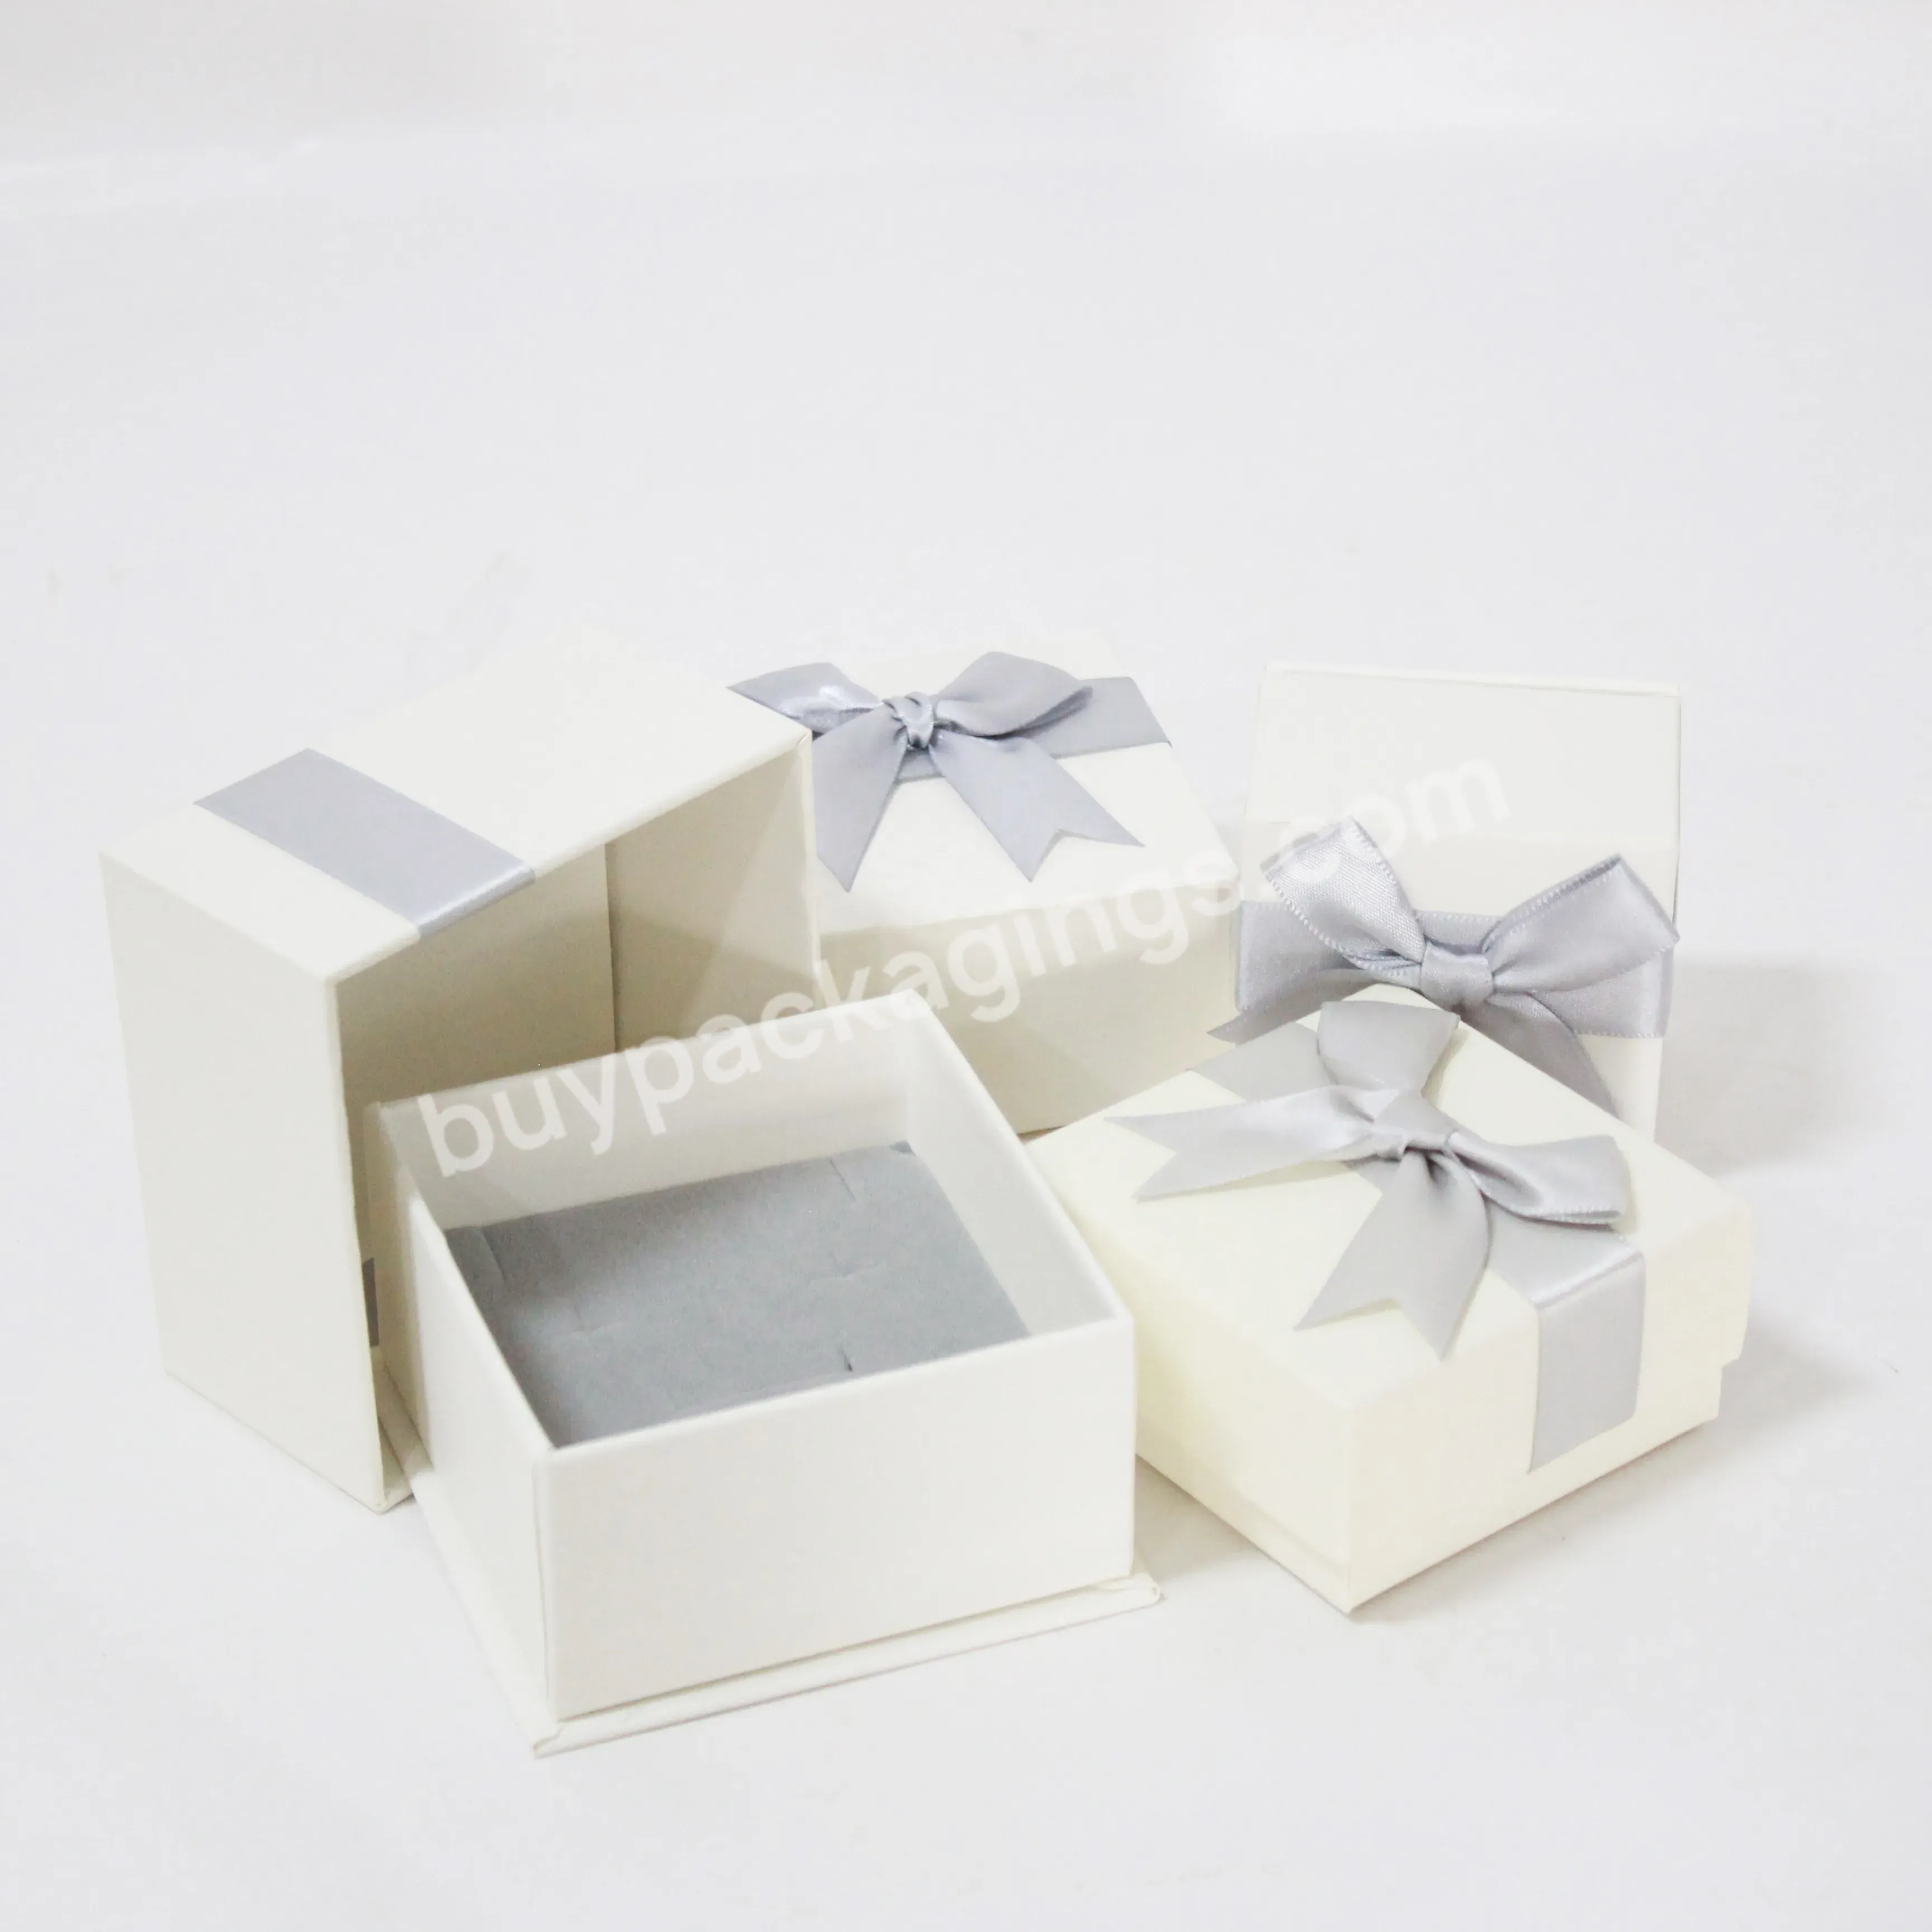 Wholesale Paperboard Ring Box Paper Engagement Wedding Gift Box Luxury Jewelry Ring Packaging - Buy Ring Boxes,Wedding Ring Packaging Box,Paperboard Boxes For Ring.